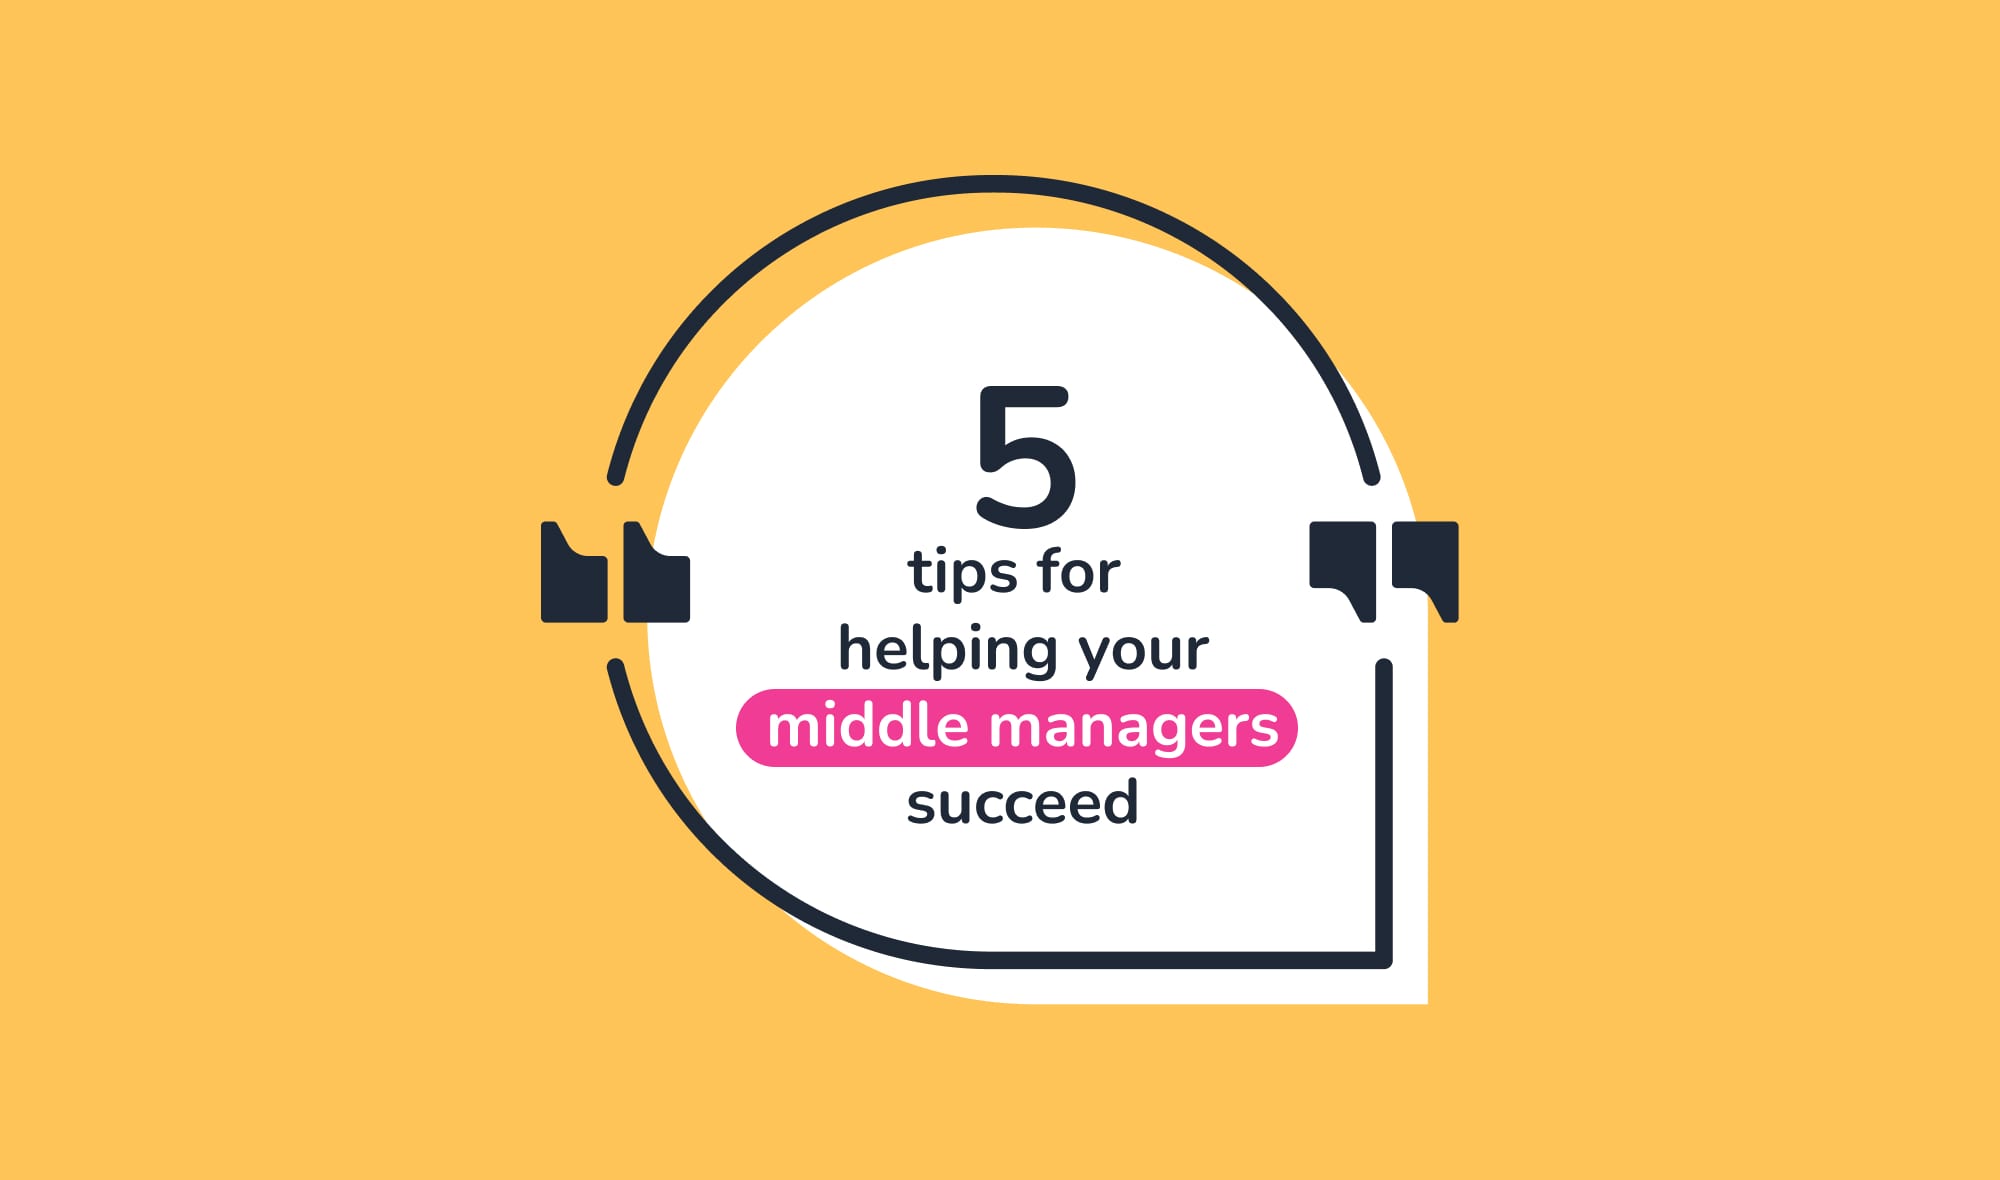 5 tips for helping your middle managers succeed